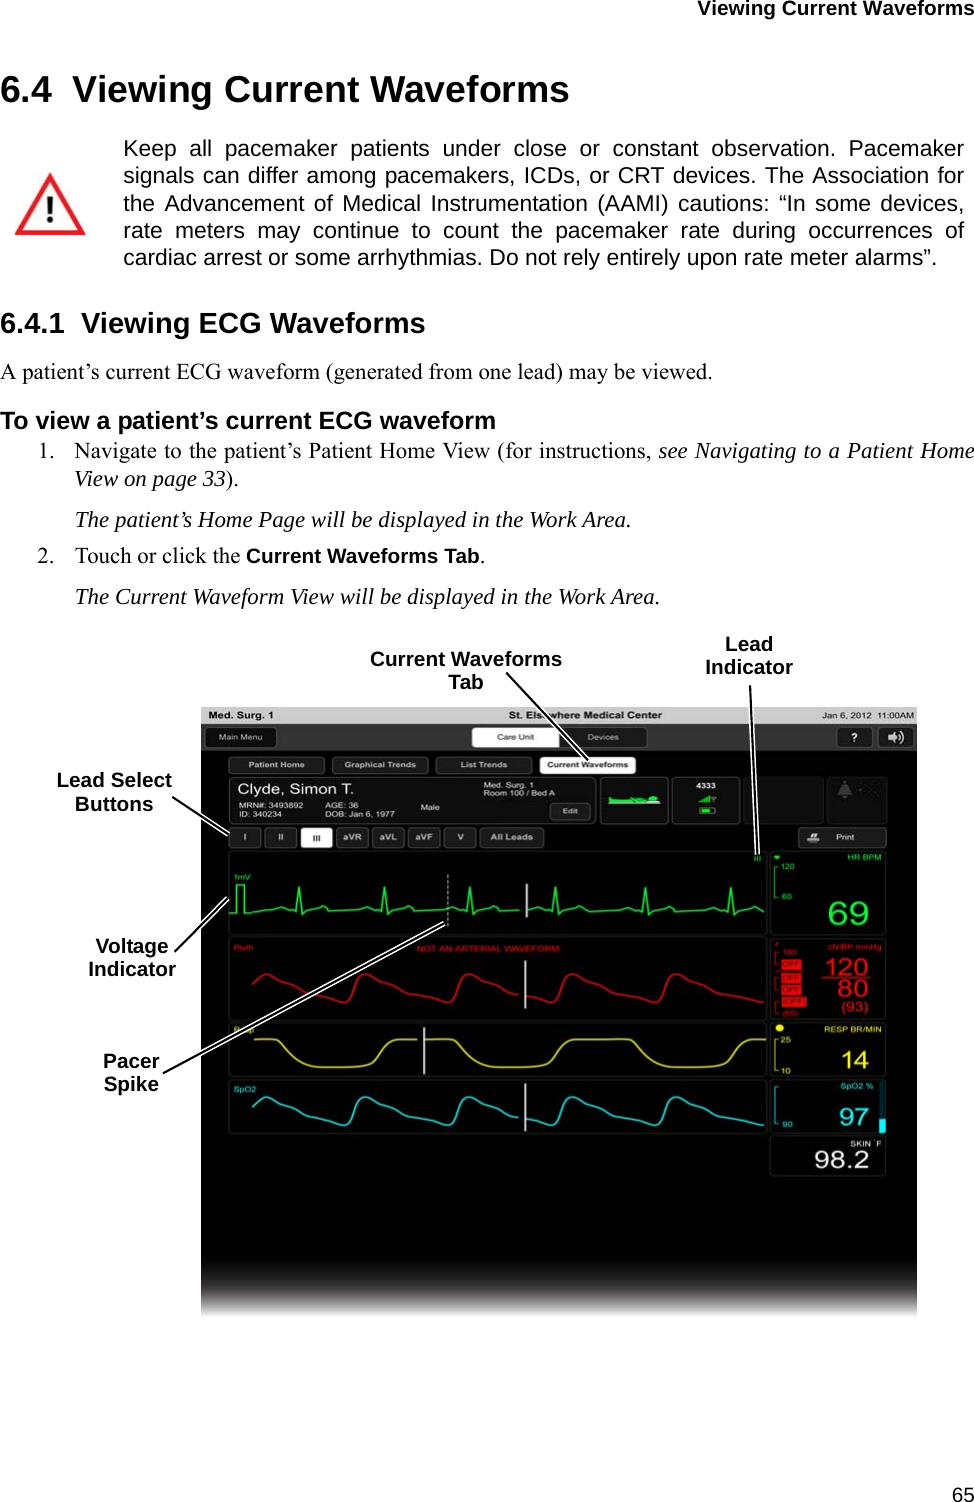 Viewing Current Waveforms656.4  Viewing Current Waveforms6.4.1  Viewing ECG WaveformsA patient’s current ECG waveform (generated from one lead) may be viewed.To view a patient’s current ECG waveform1. Navigate to the patient’s Patient Home View (for instructions, see Navigating to a Patient HomeView on page 33).The patient’s Home Page will be displayed in the Work Area.2. Touch or click the Current Waveforms Tab.The Current Waveform View will be displayed in the Work Area.Keep all pacemaker patients under close or constant observation. Pacemakersignals can differ among pacemakers, ICDs, or CRT devices. The Association forthe Advancement of Medical Instrumentation (AAMI) cautions: “In some devices,rate meters may continue to count the pacemaker rate during occurrences ofcardiac arrest or some arrhythmias. Do not rely entirely upon rate meter alarms”.LeadVoltageLead SelectCurrent WaveformsIndicatorButtonsIndicatorTabPacerSpike